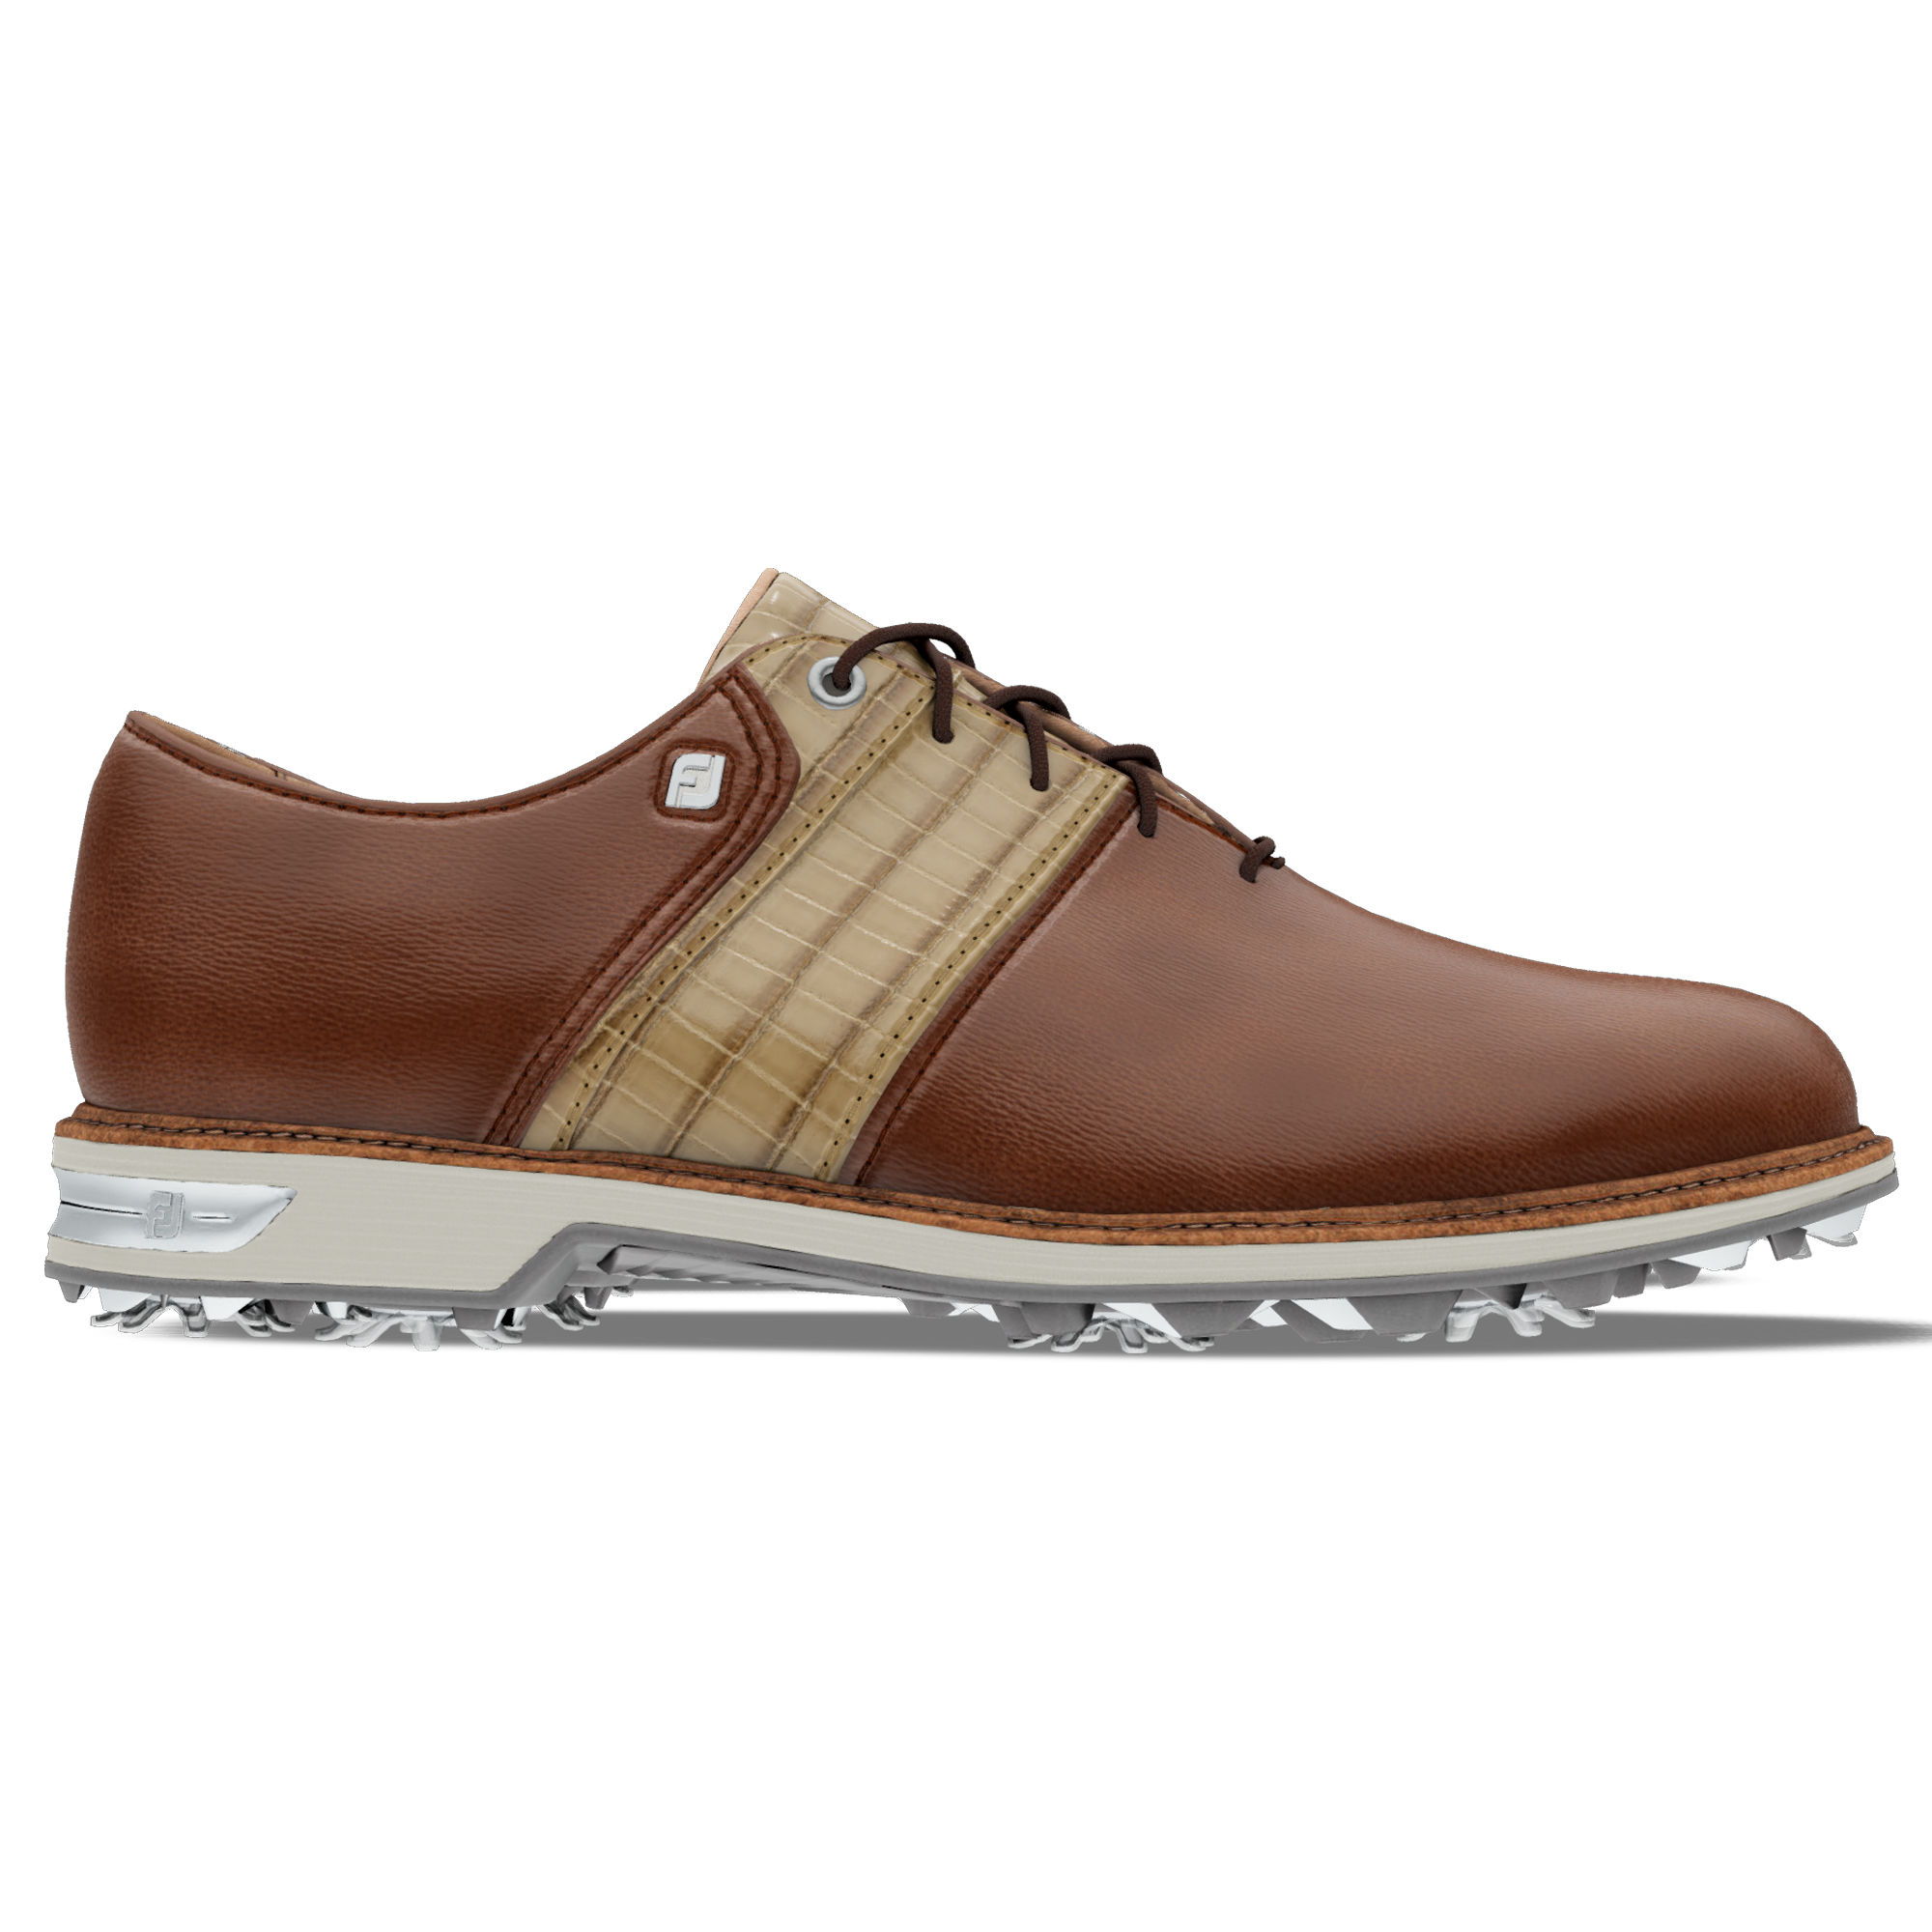 ESS Shoes Brooks Full Brown Golf Shoe Golf Shoes For Men - Buy ESS Shoes  Brooks Full Brown Golf Shoe Golf Shoes For Men Online at Best Price - Shop  Online for